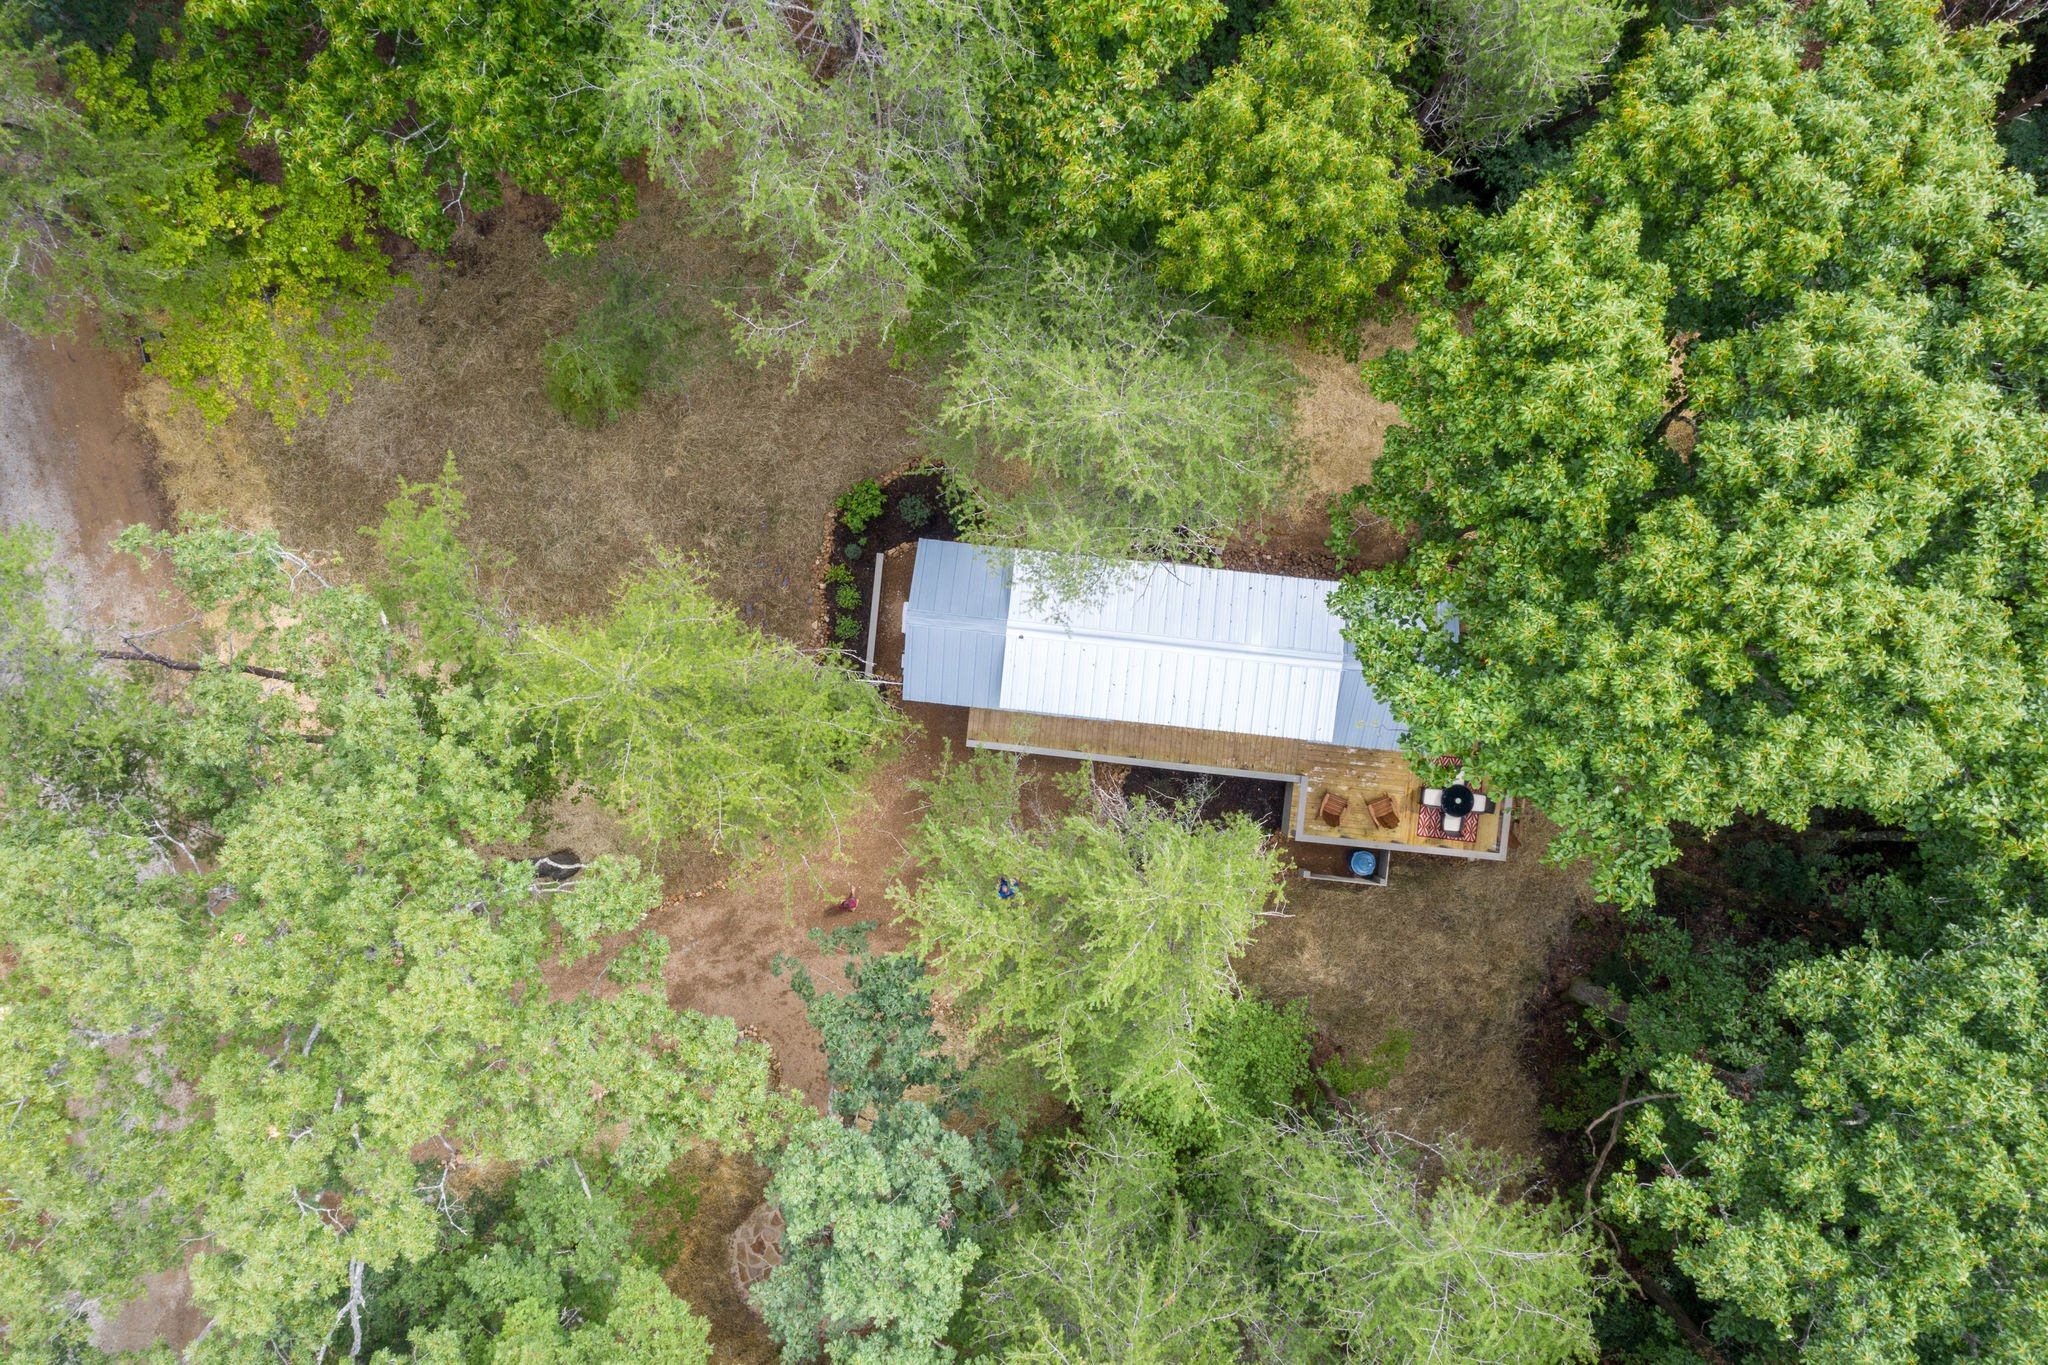 Tiny_home_overhead_tin roof_secluded-2039.jpg